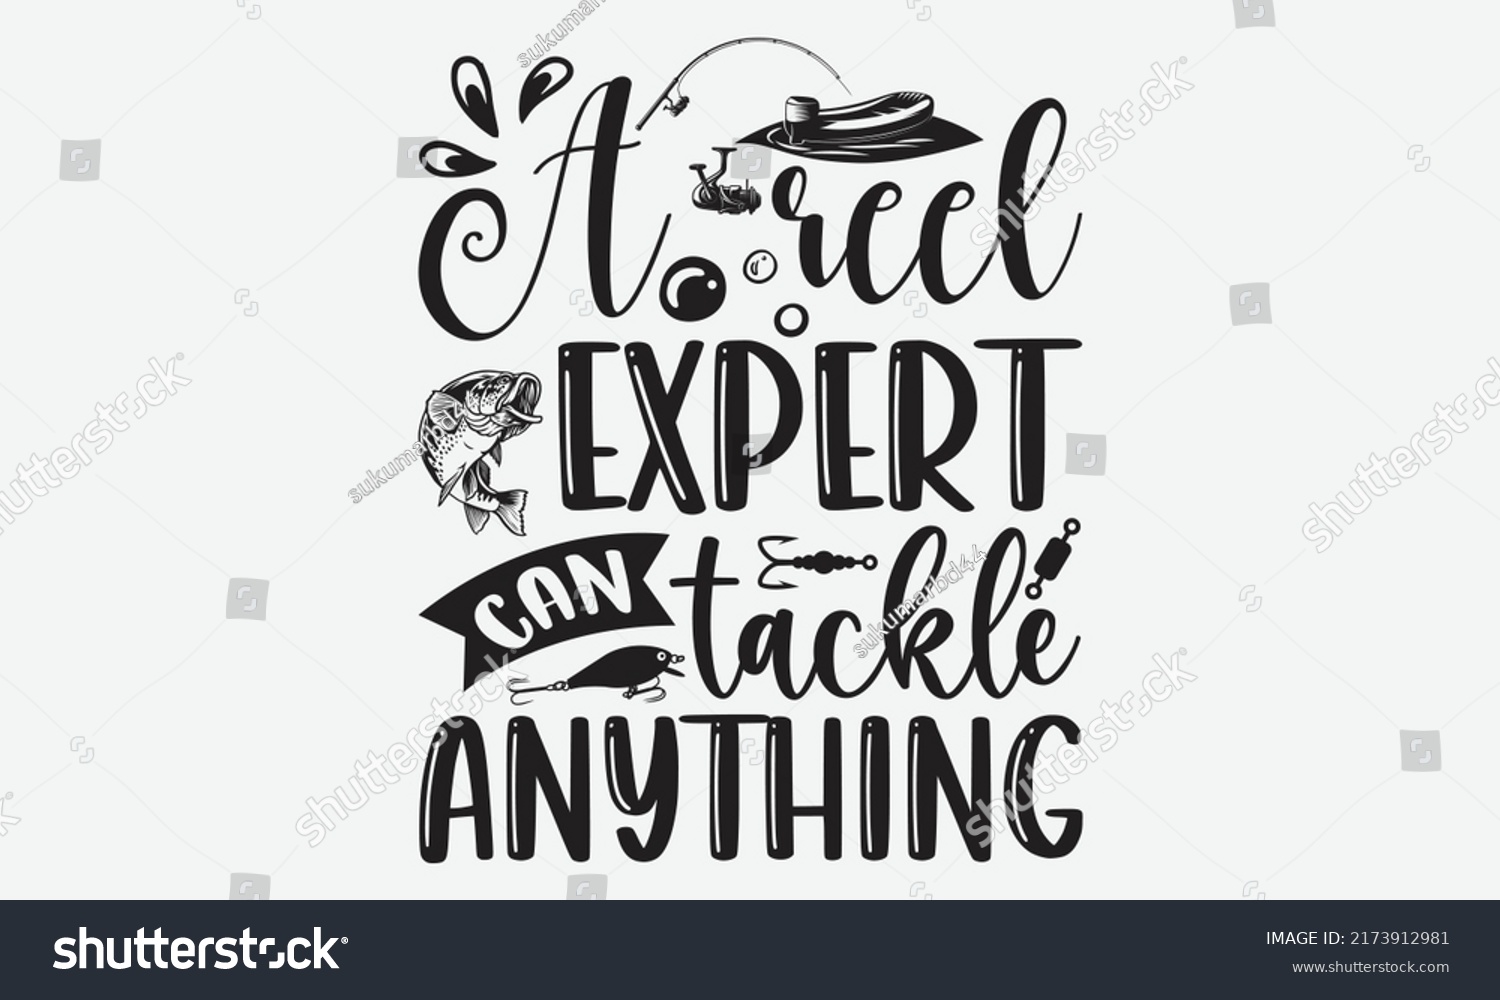 SVG of A reel expert can tackle anything - Fishing t shirt design, svg eps Files for Cutting, Handmade calligraphy vector illustration, Hand written vector sign, svg svg